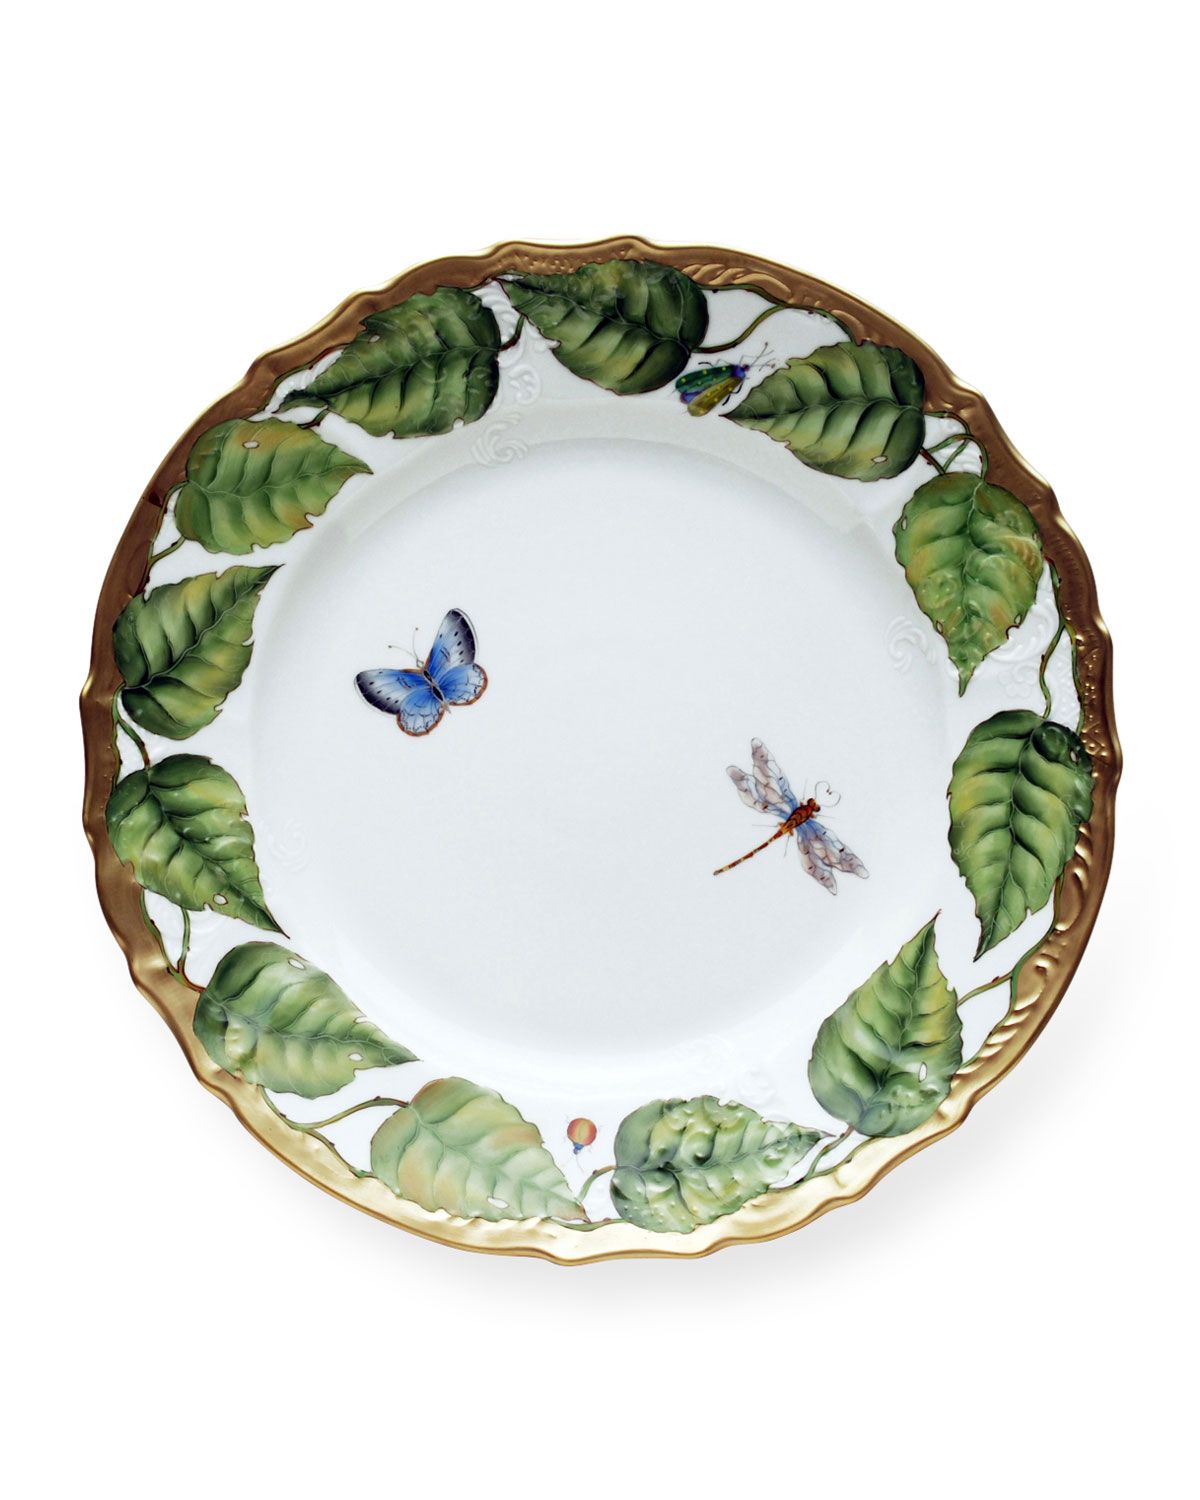 Ivy Garland Charger Plate | Neiman Marcus